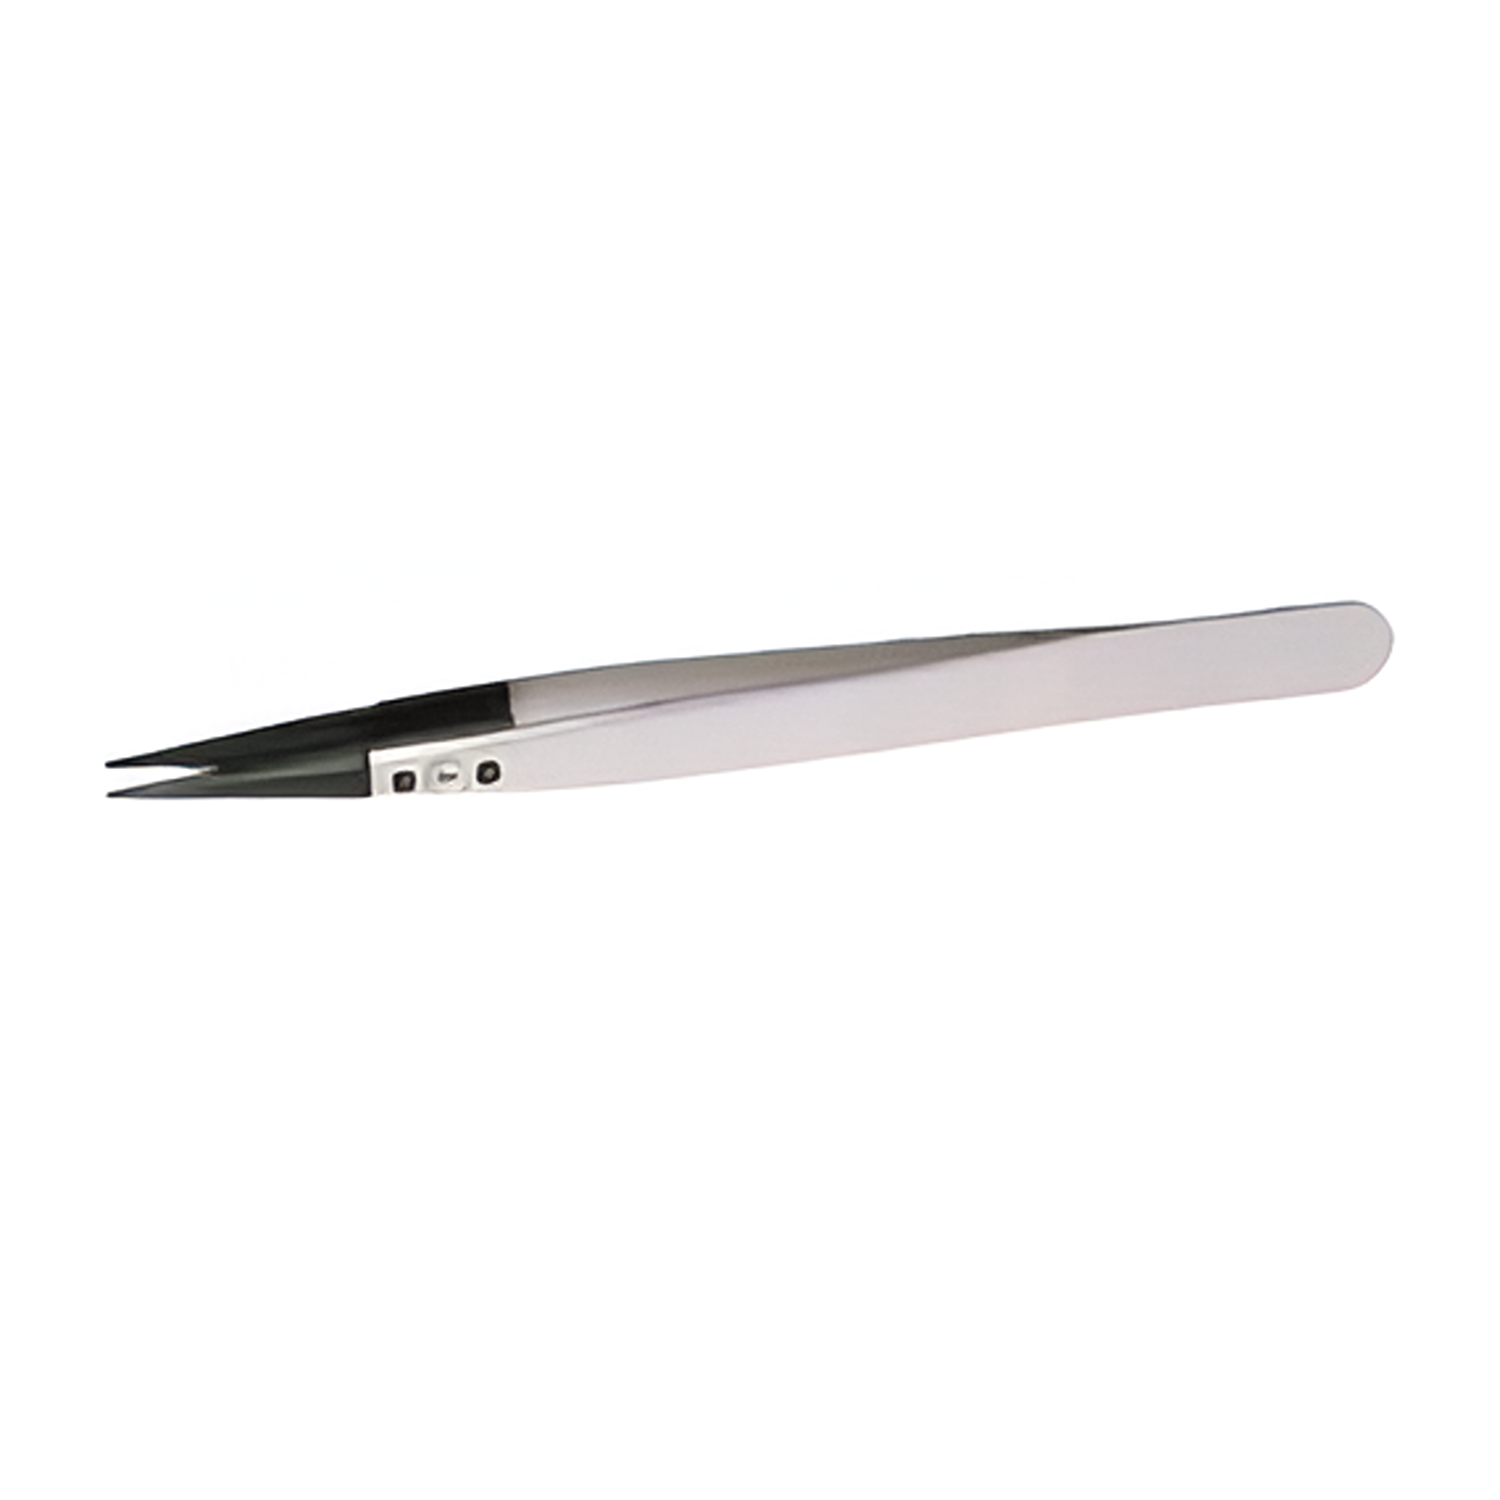 BAHCO TL 00CFR-SA Tweezers with Carbon Fibre Tips 130 mm - Premium Tweezers from BAHCO - Shop now at Yew Aik.